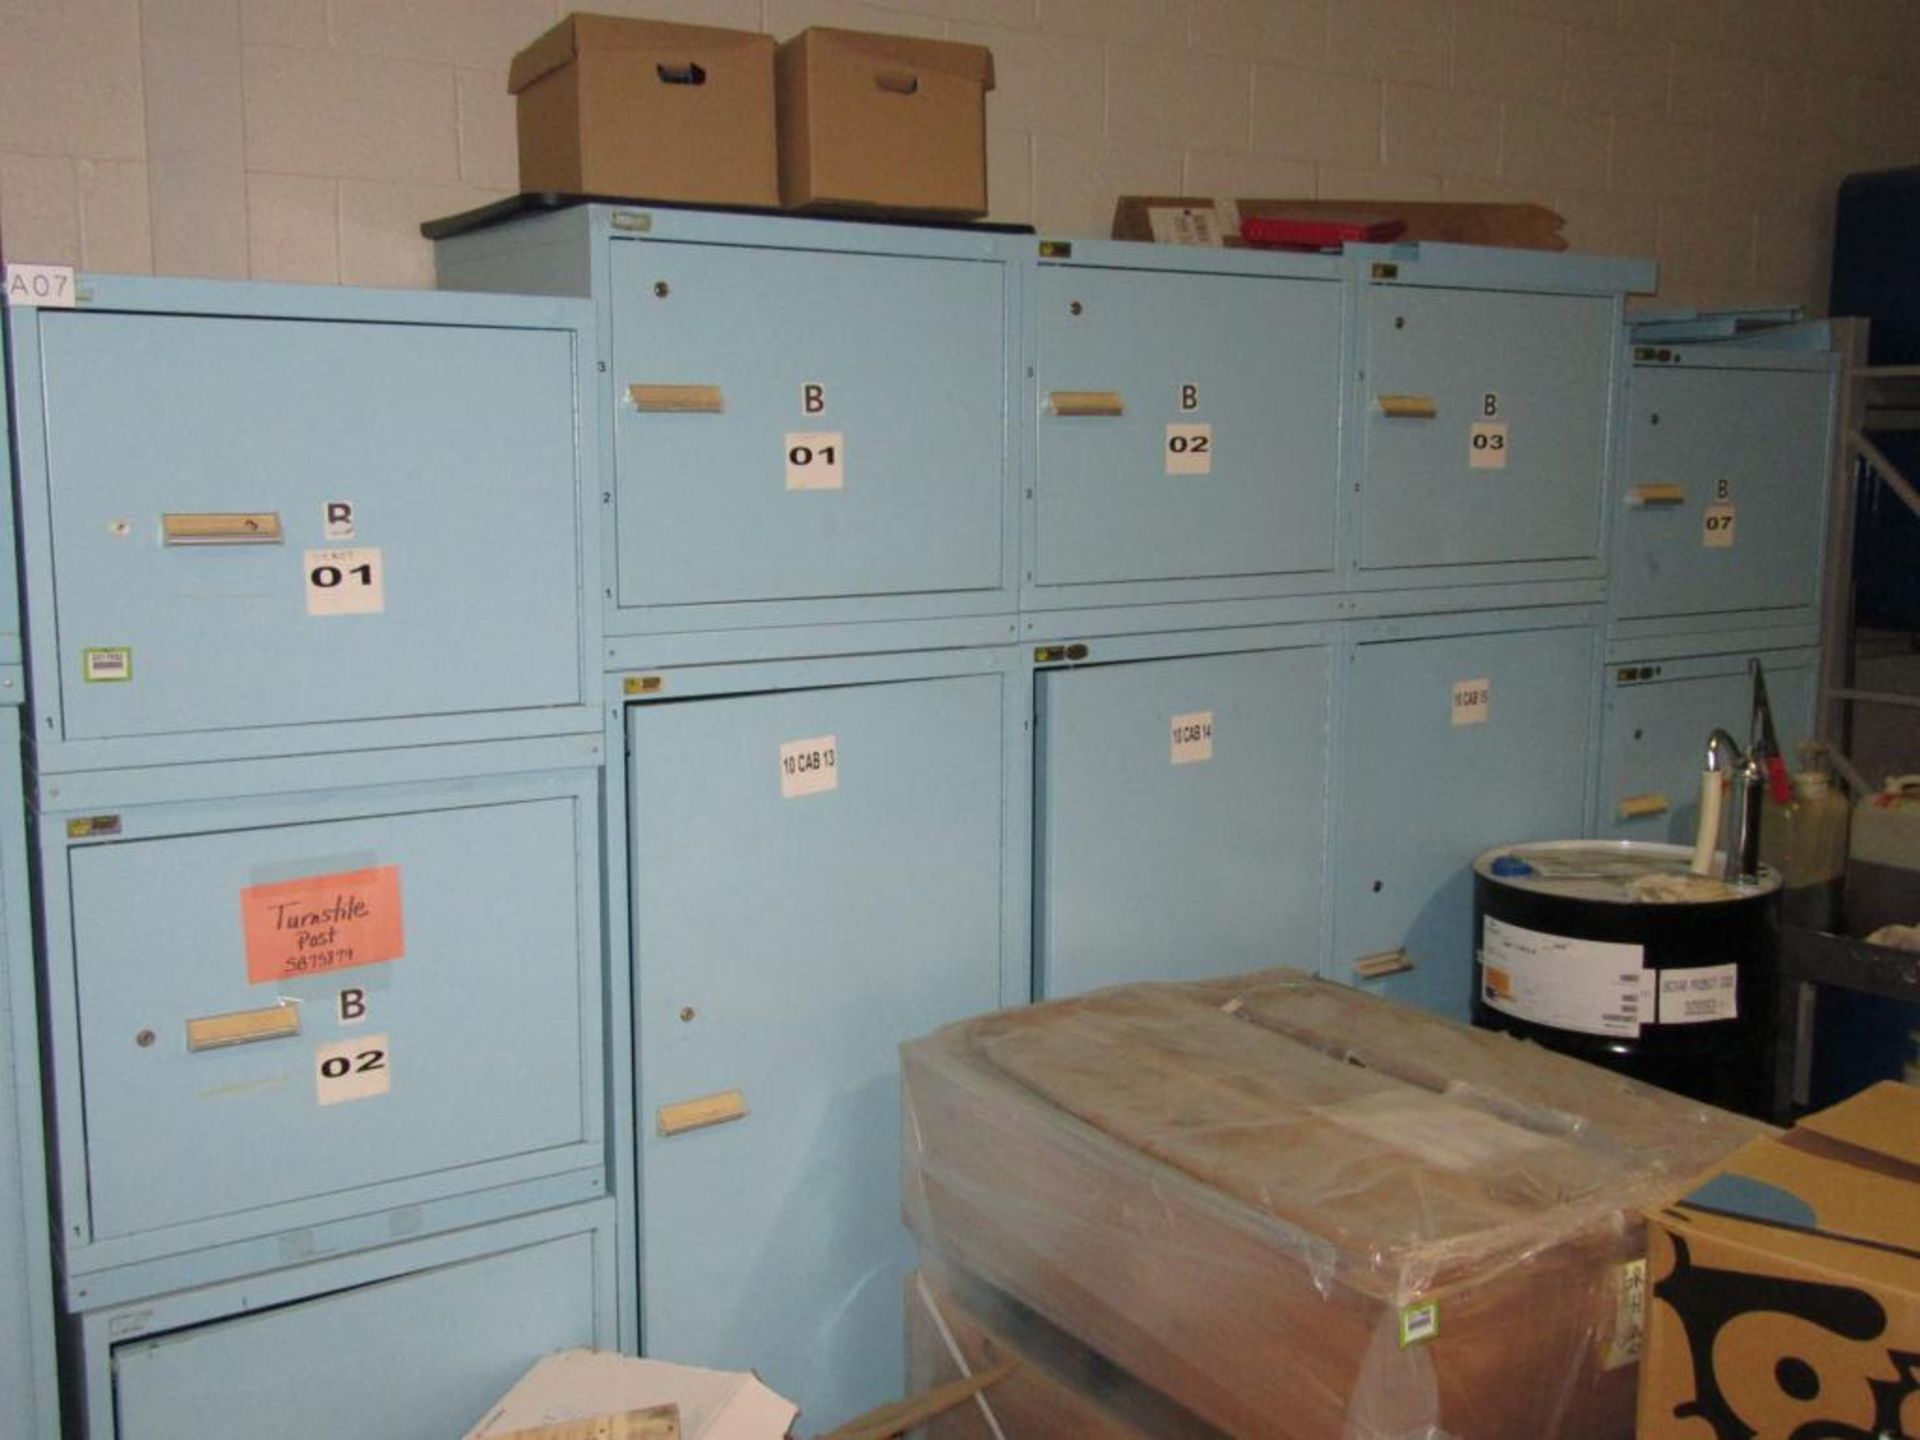 Cabinets; Lot: (12) Vidmar Single Door Storage Cabinets, Consisting of: (3) 59"H x 30"W x 28"D & (